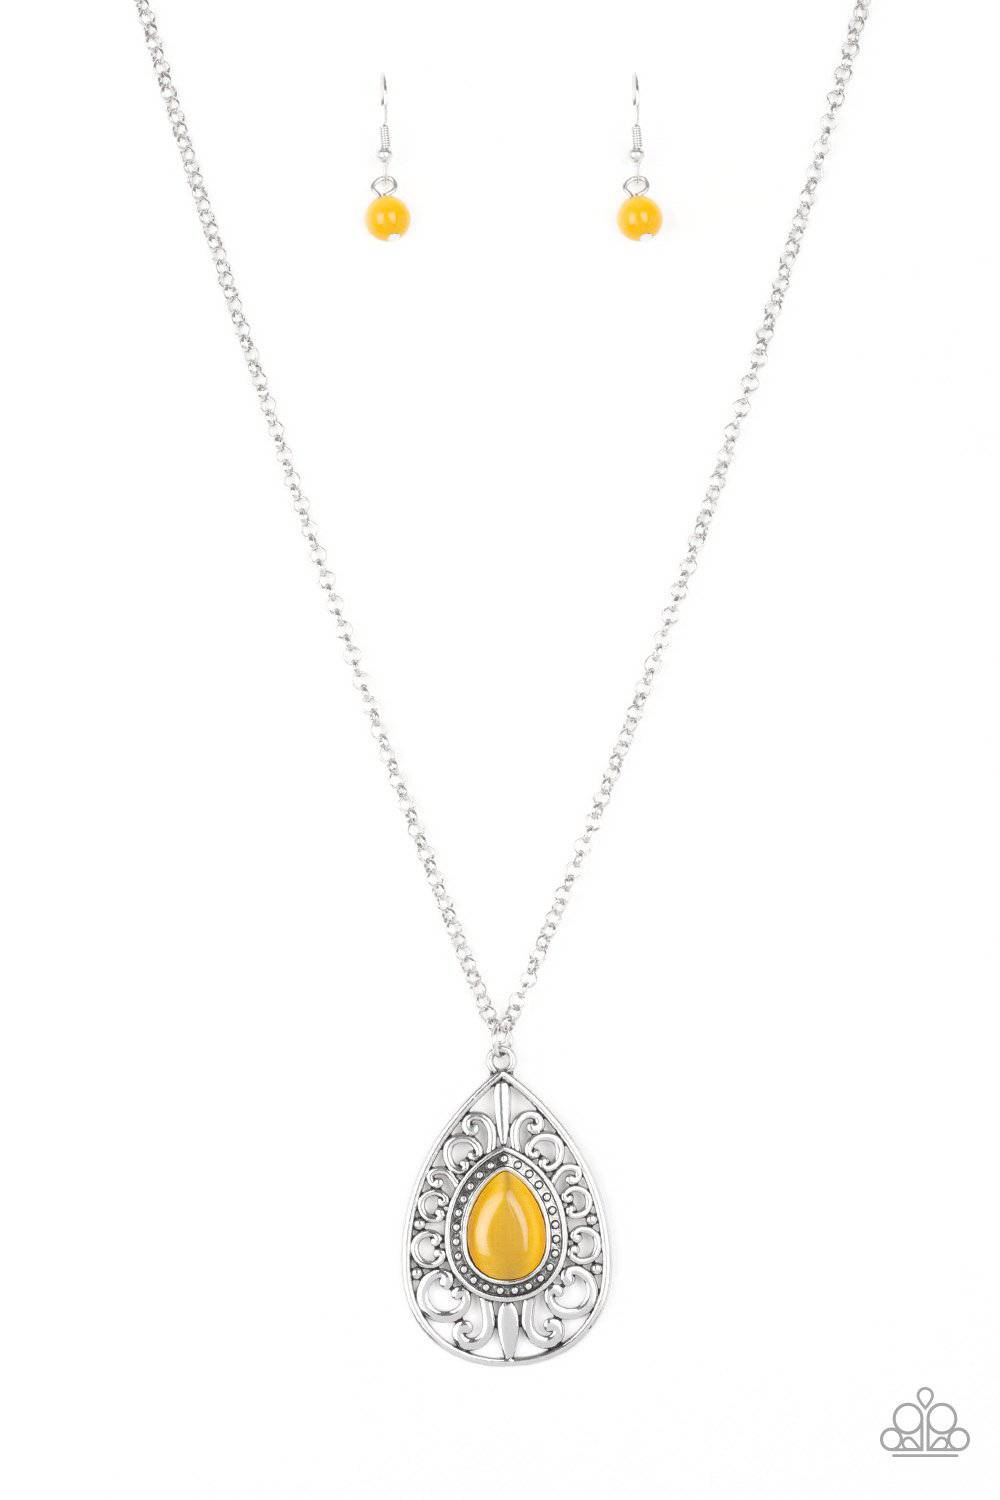 A140 - Modern Majesty Yellow Necklace by Paparazzi Accessories on Fancy5Fashion.com